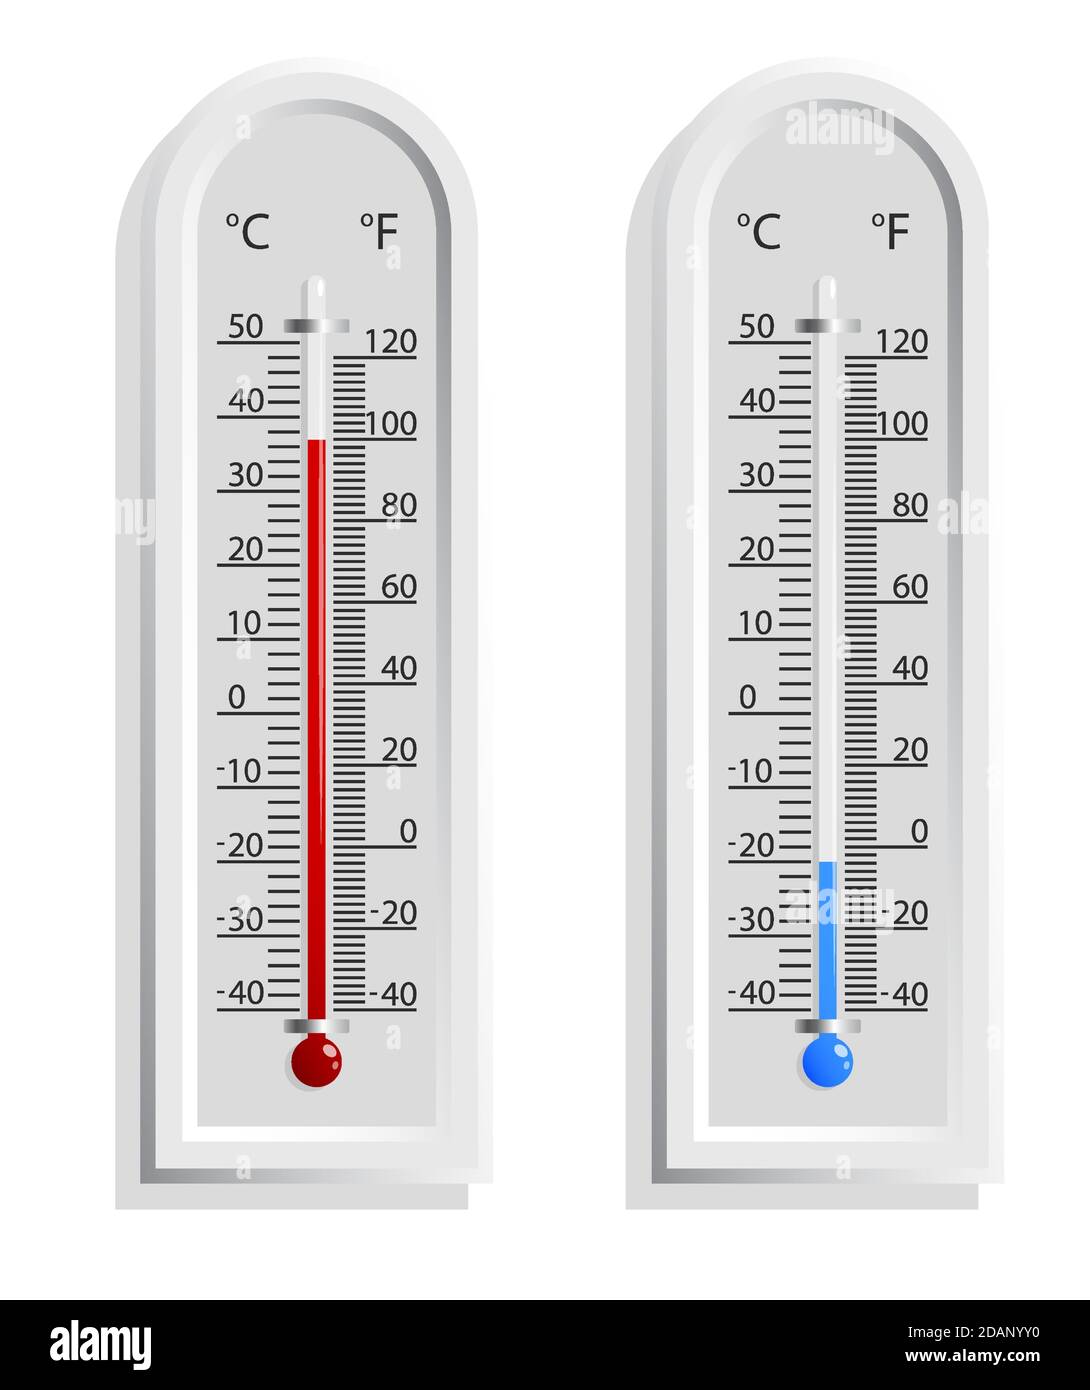 https://c8.alamy.com/comp/2DANYY0/realistic-weather-thermometer-with-high-and-low-temperature-outdoor-temperature-measurement-isolated-vector-on-white-background-2DANYY0.jpg